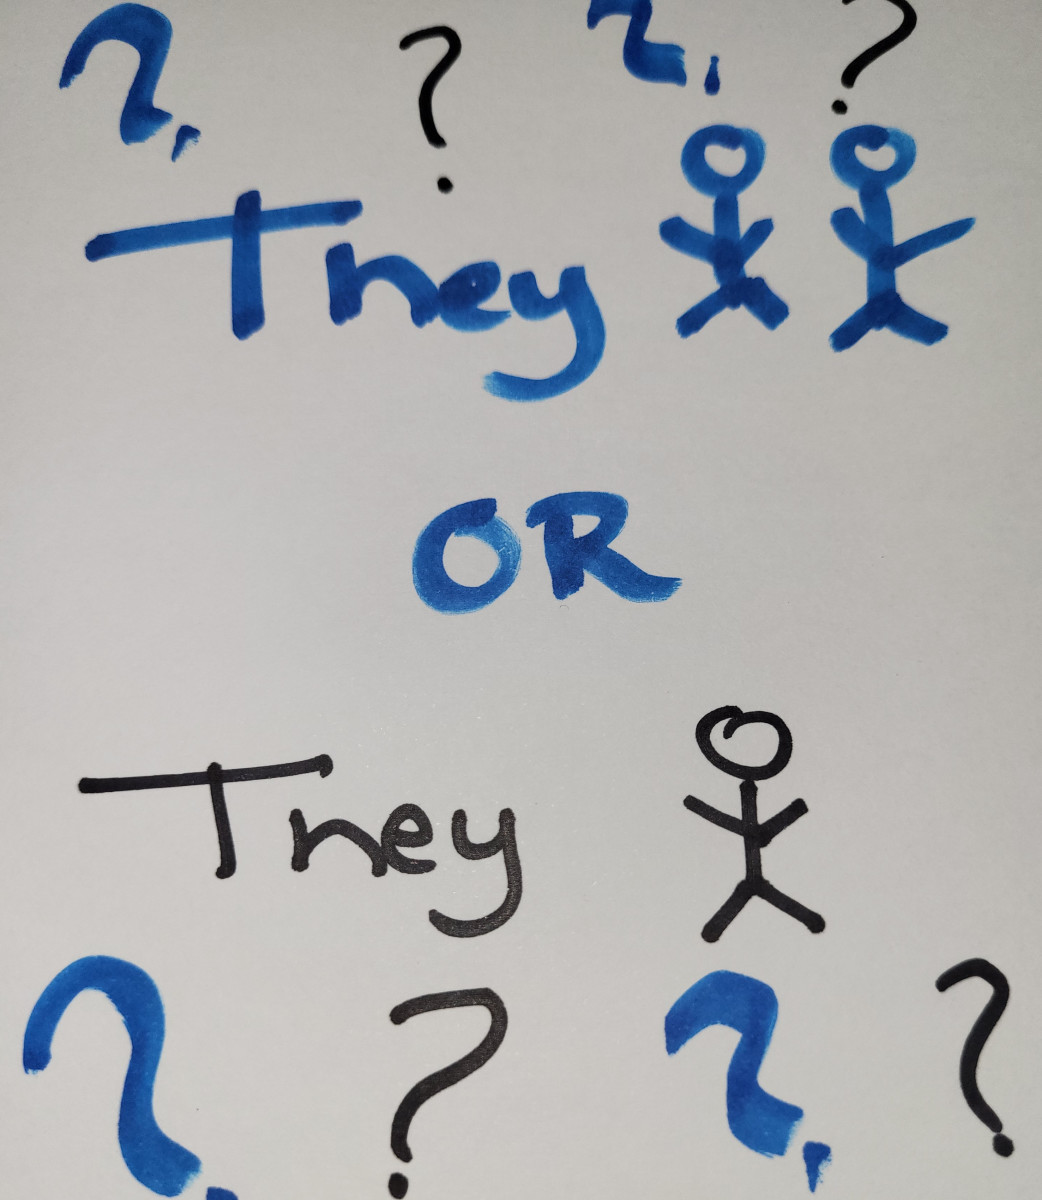 Using "they" as singular and plural can create confusion while reading or listening to written text. 